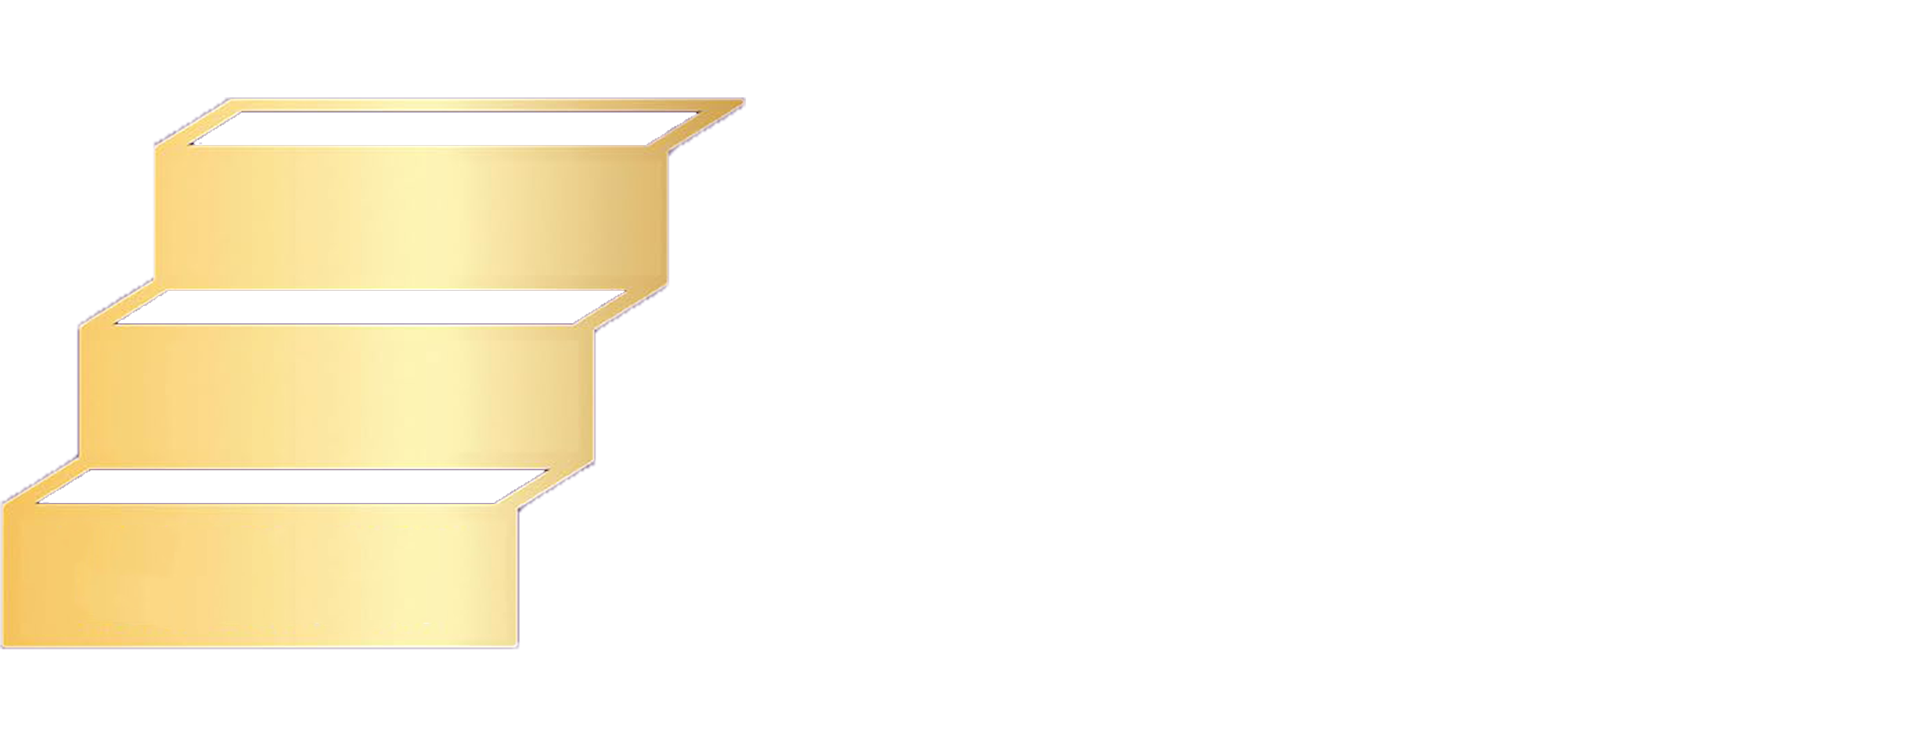 The Solutions Focus